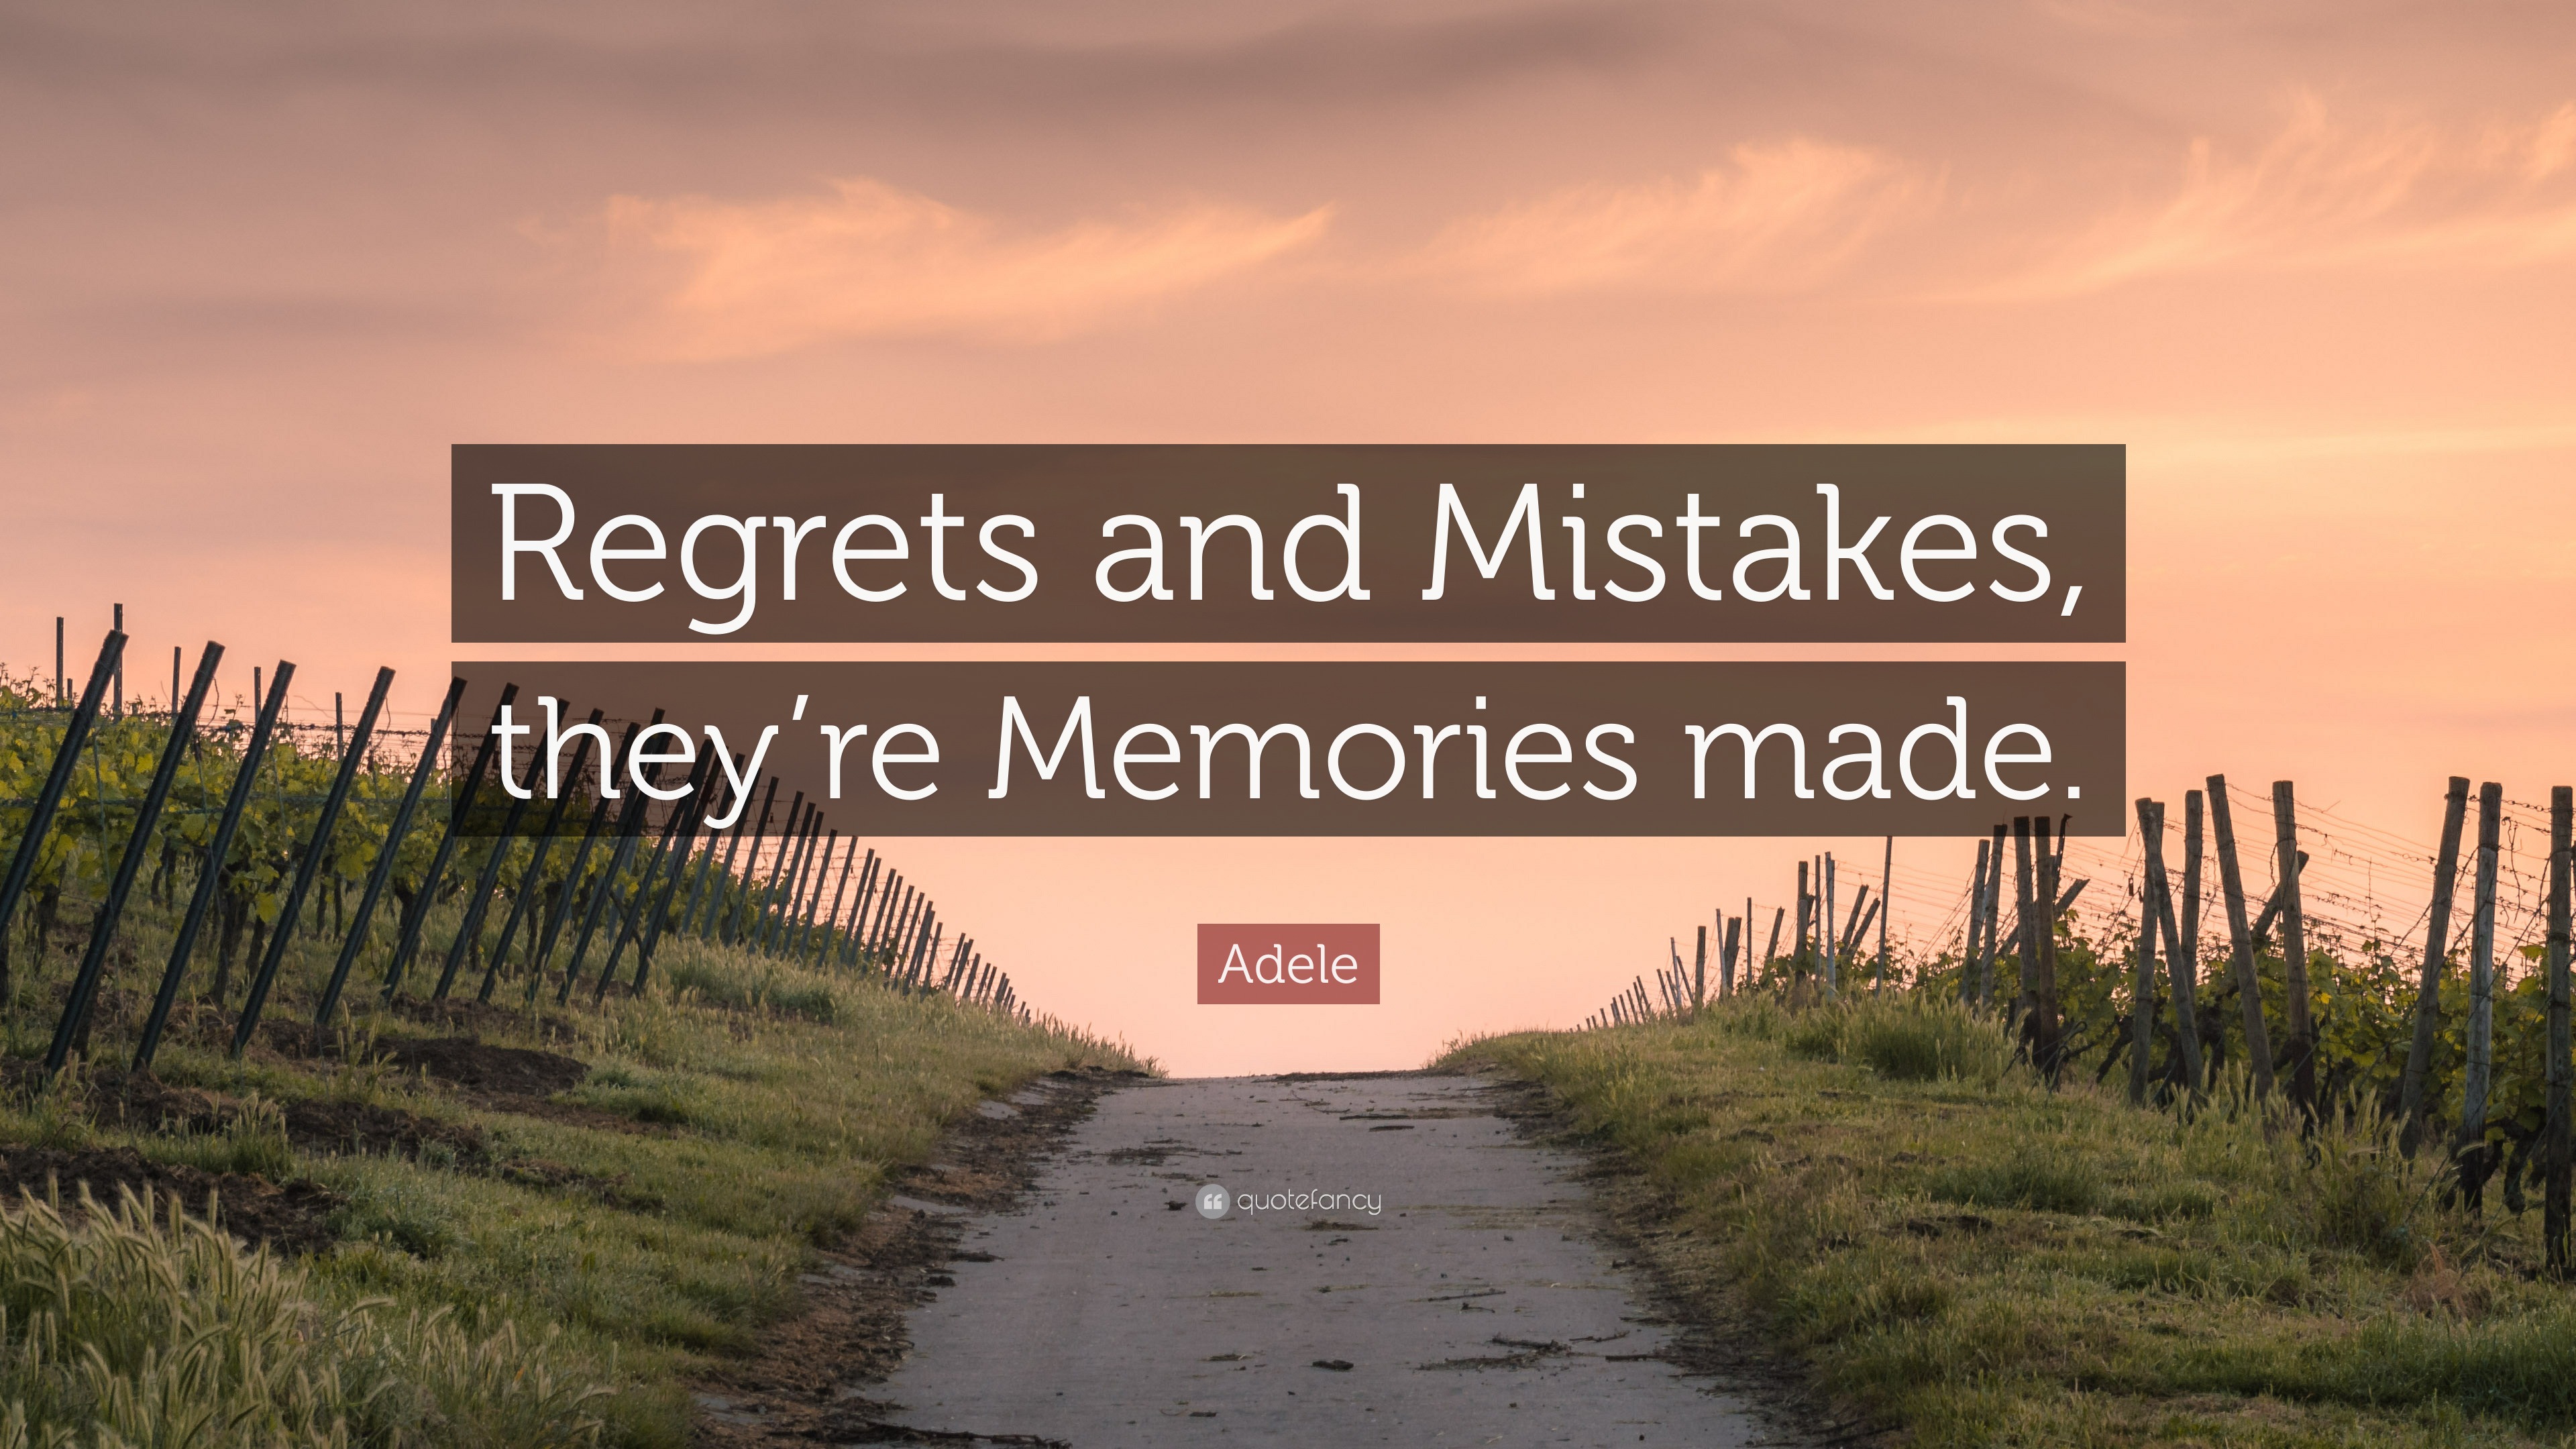 regrets and mistakes, they're memories made. who would have known